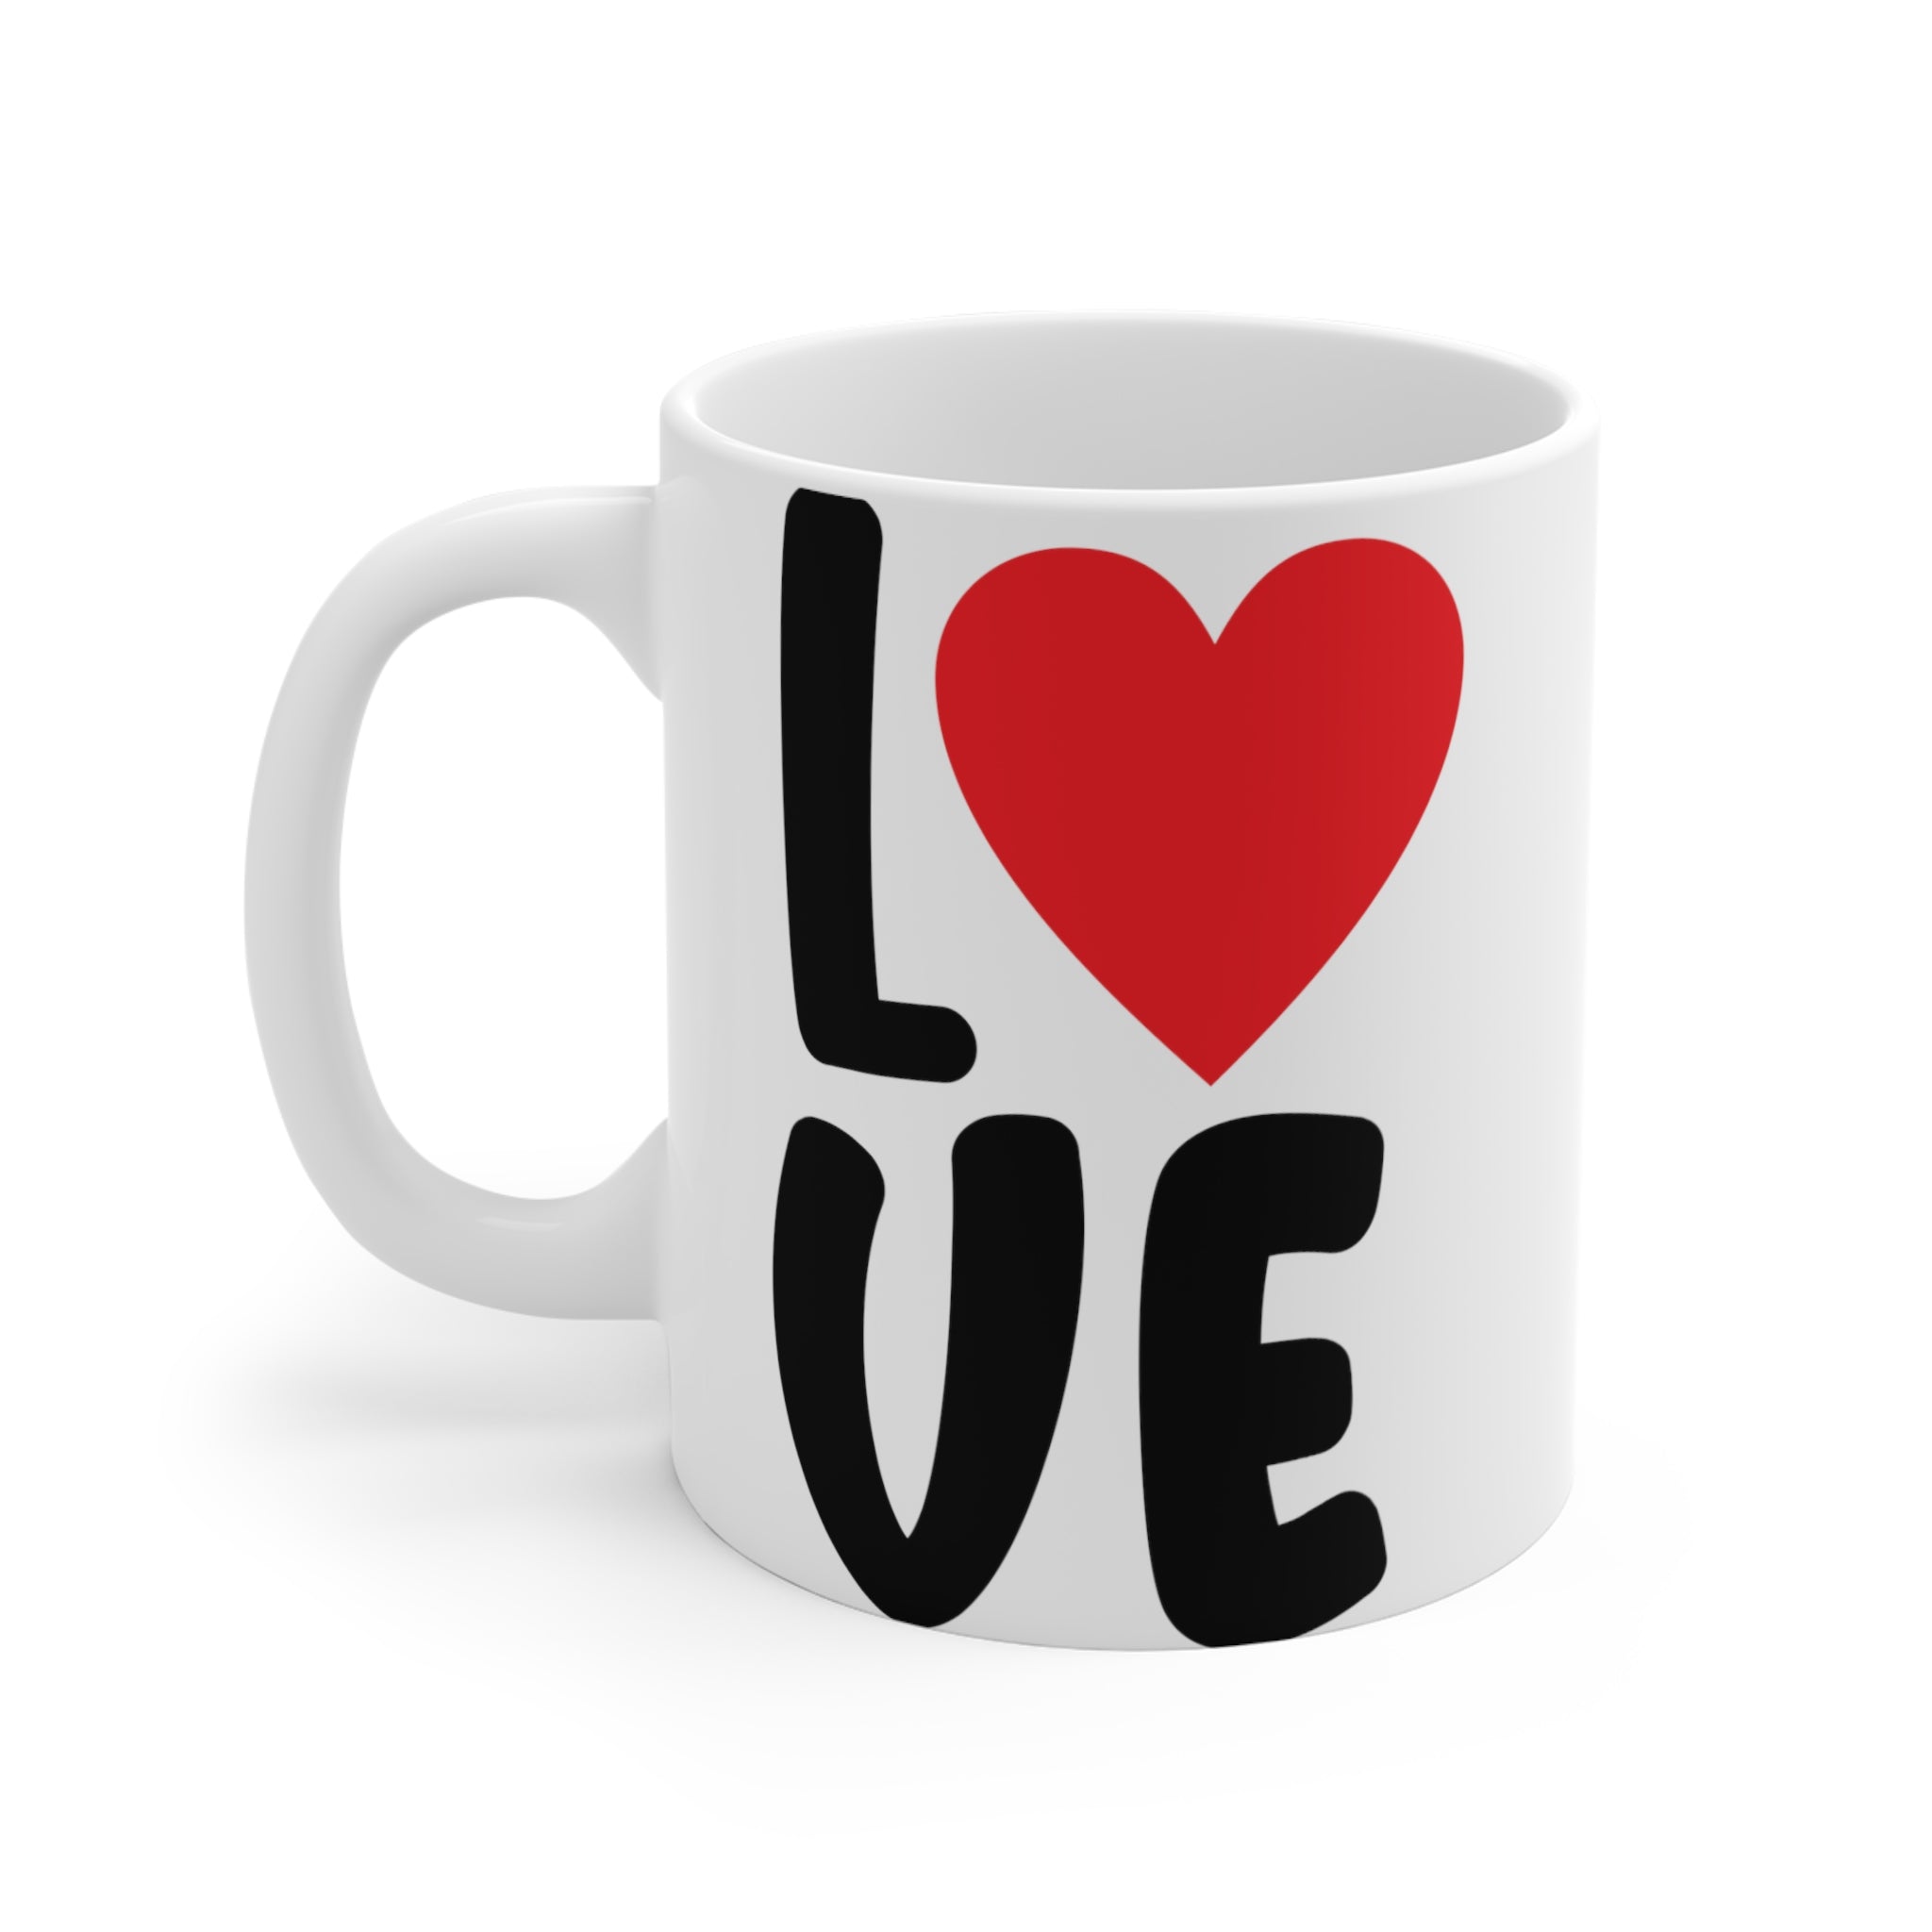 LOVE | Printed Coffee Mug for Your Loved Ones | 11oz